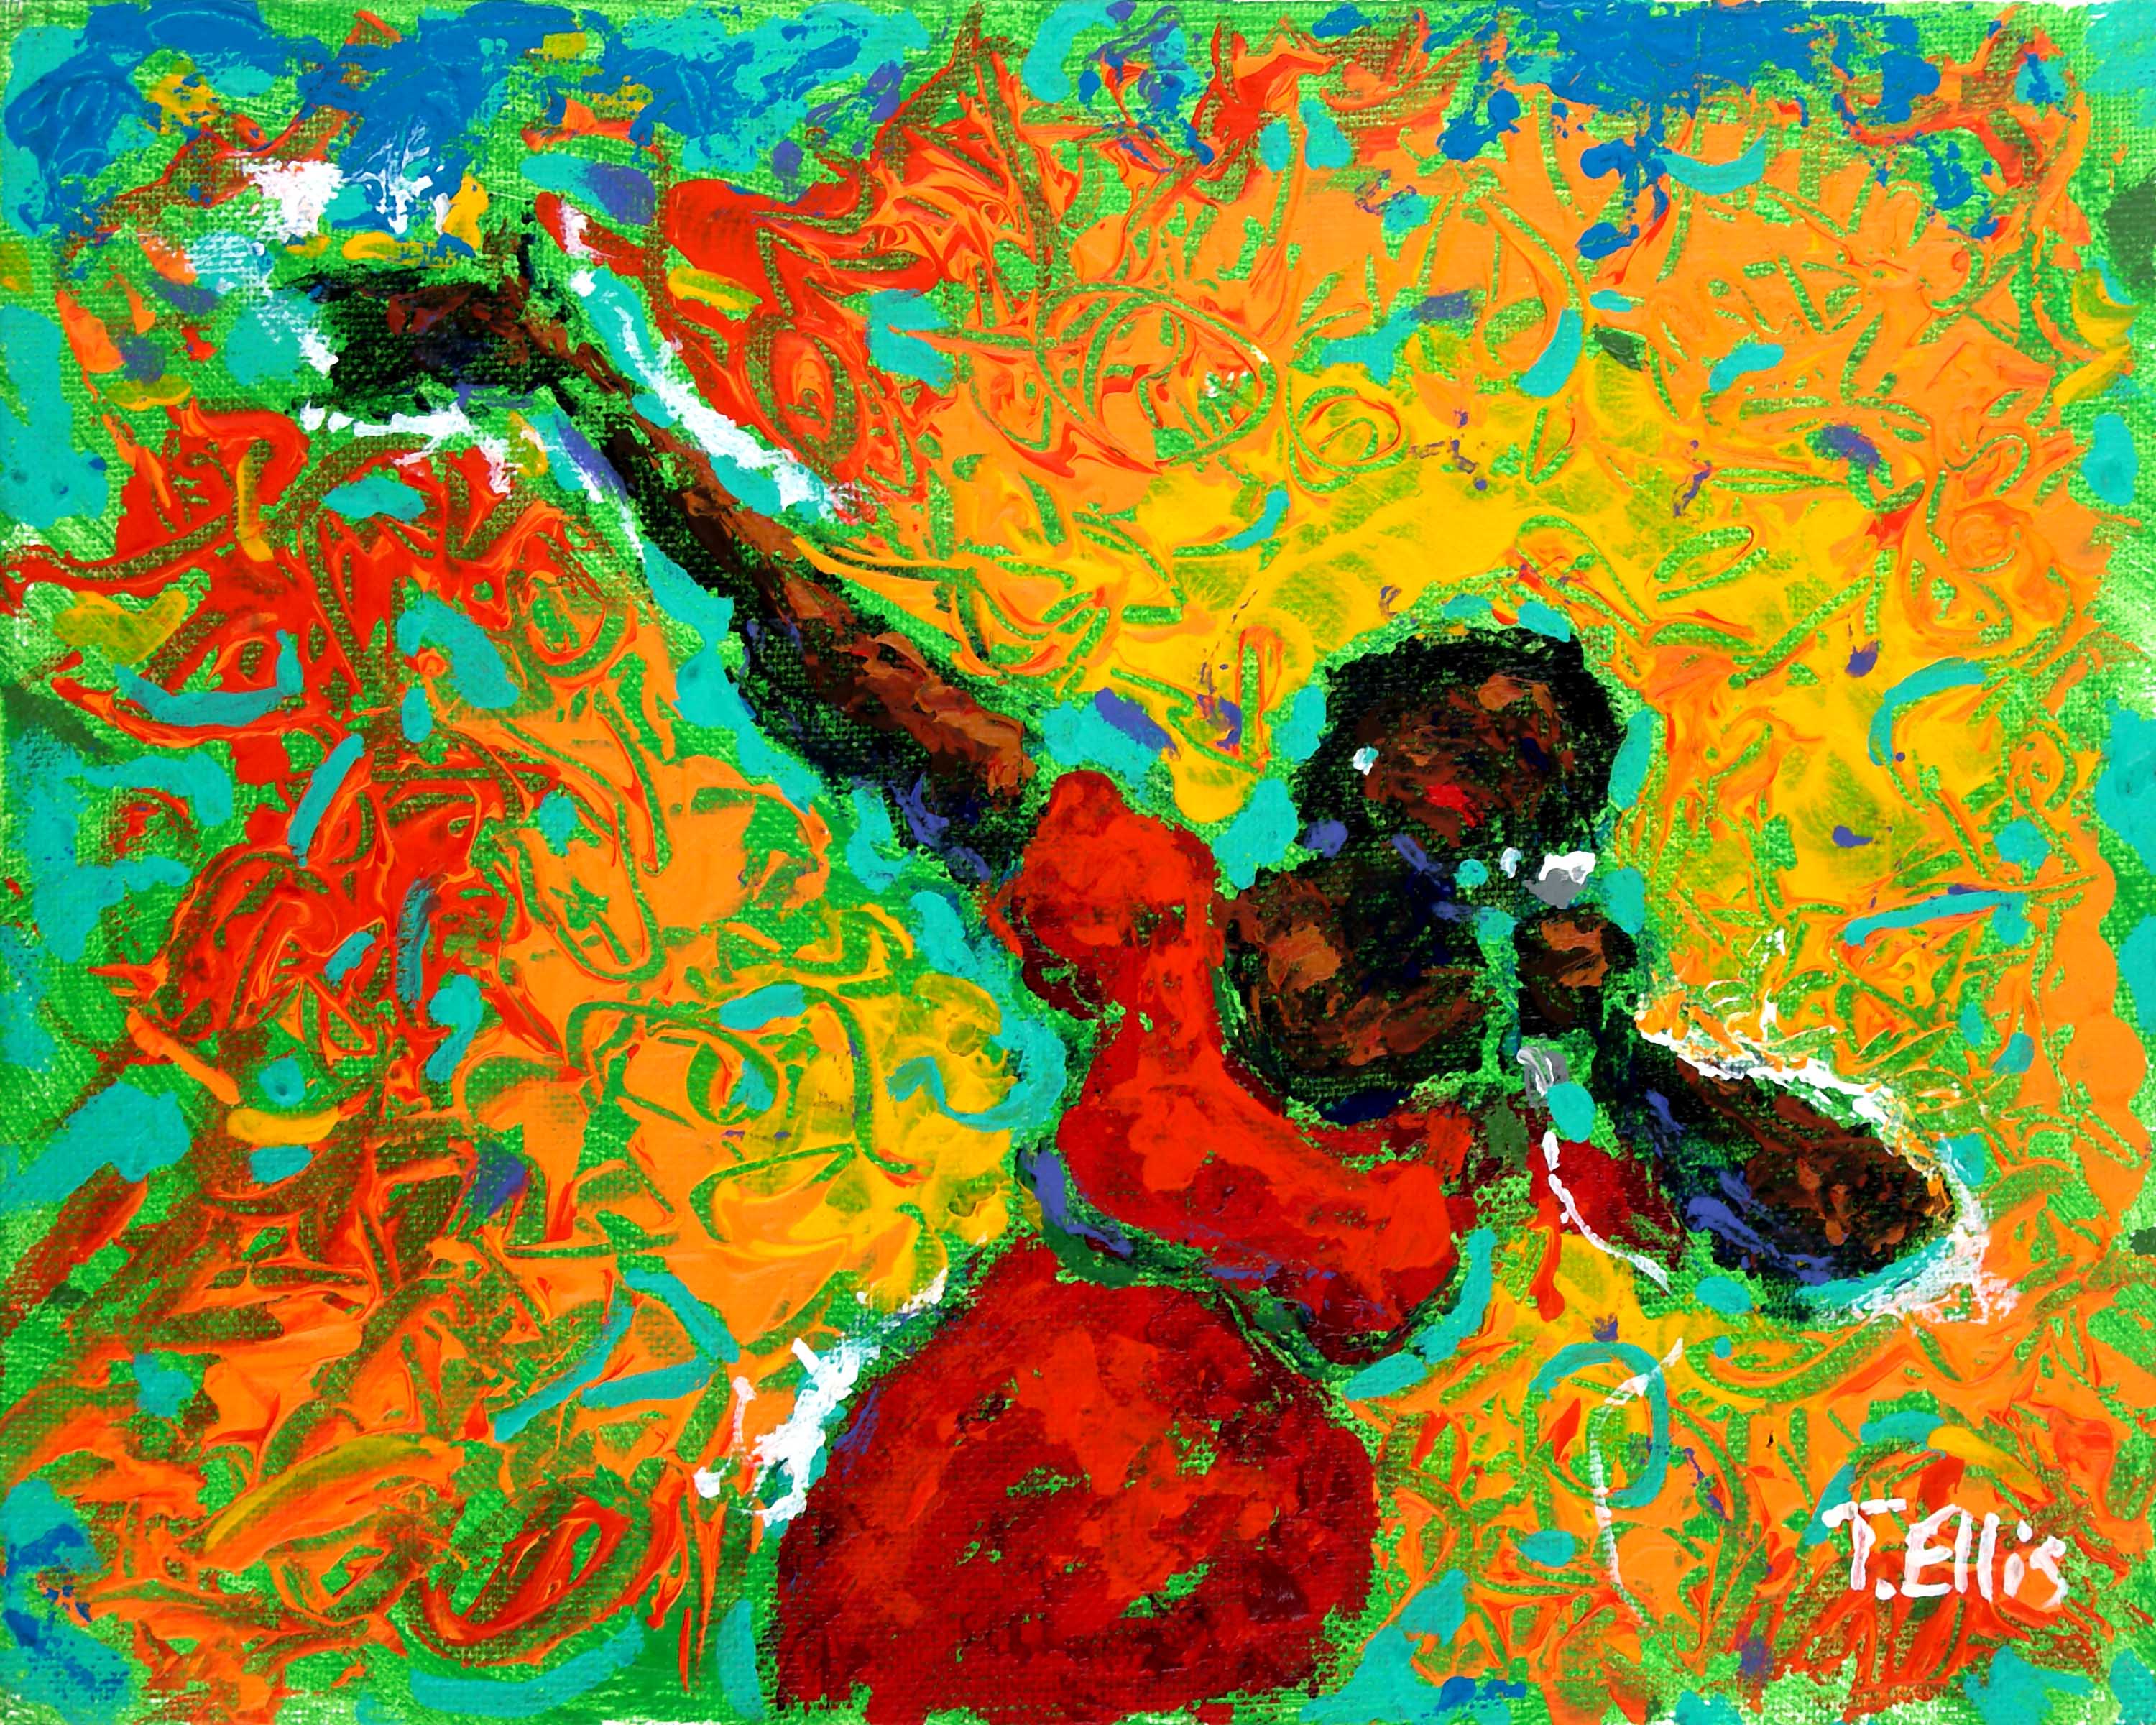 ellis ted artist feeling artists singer history blues heritage famous african american painting troy museum partners paint university parks houston